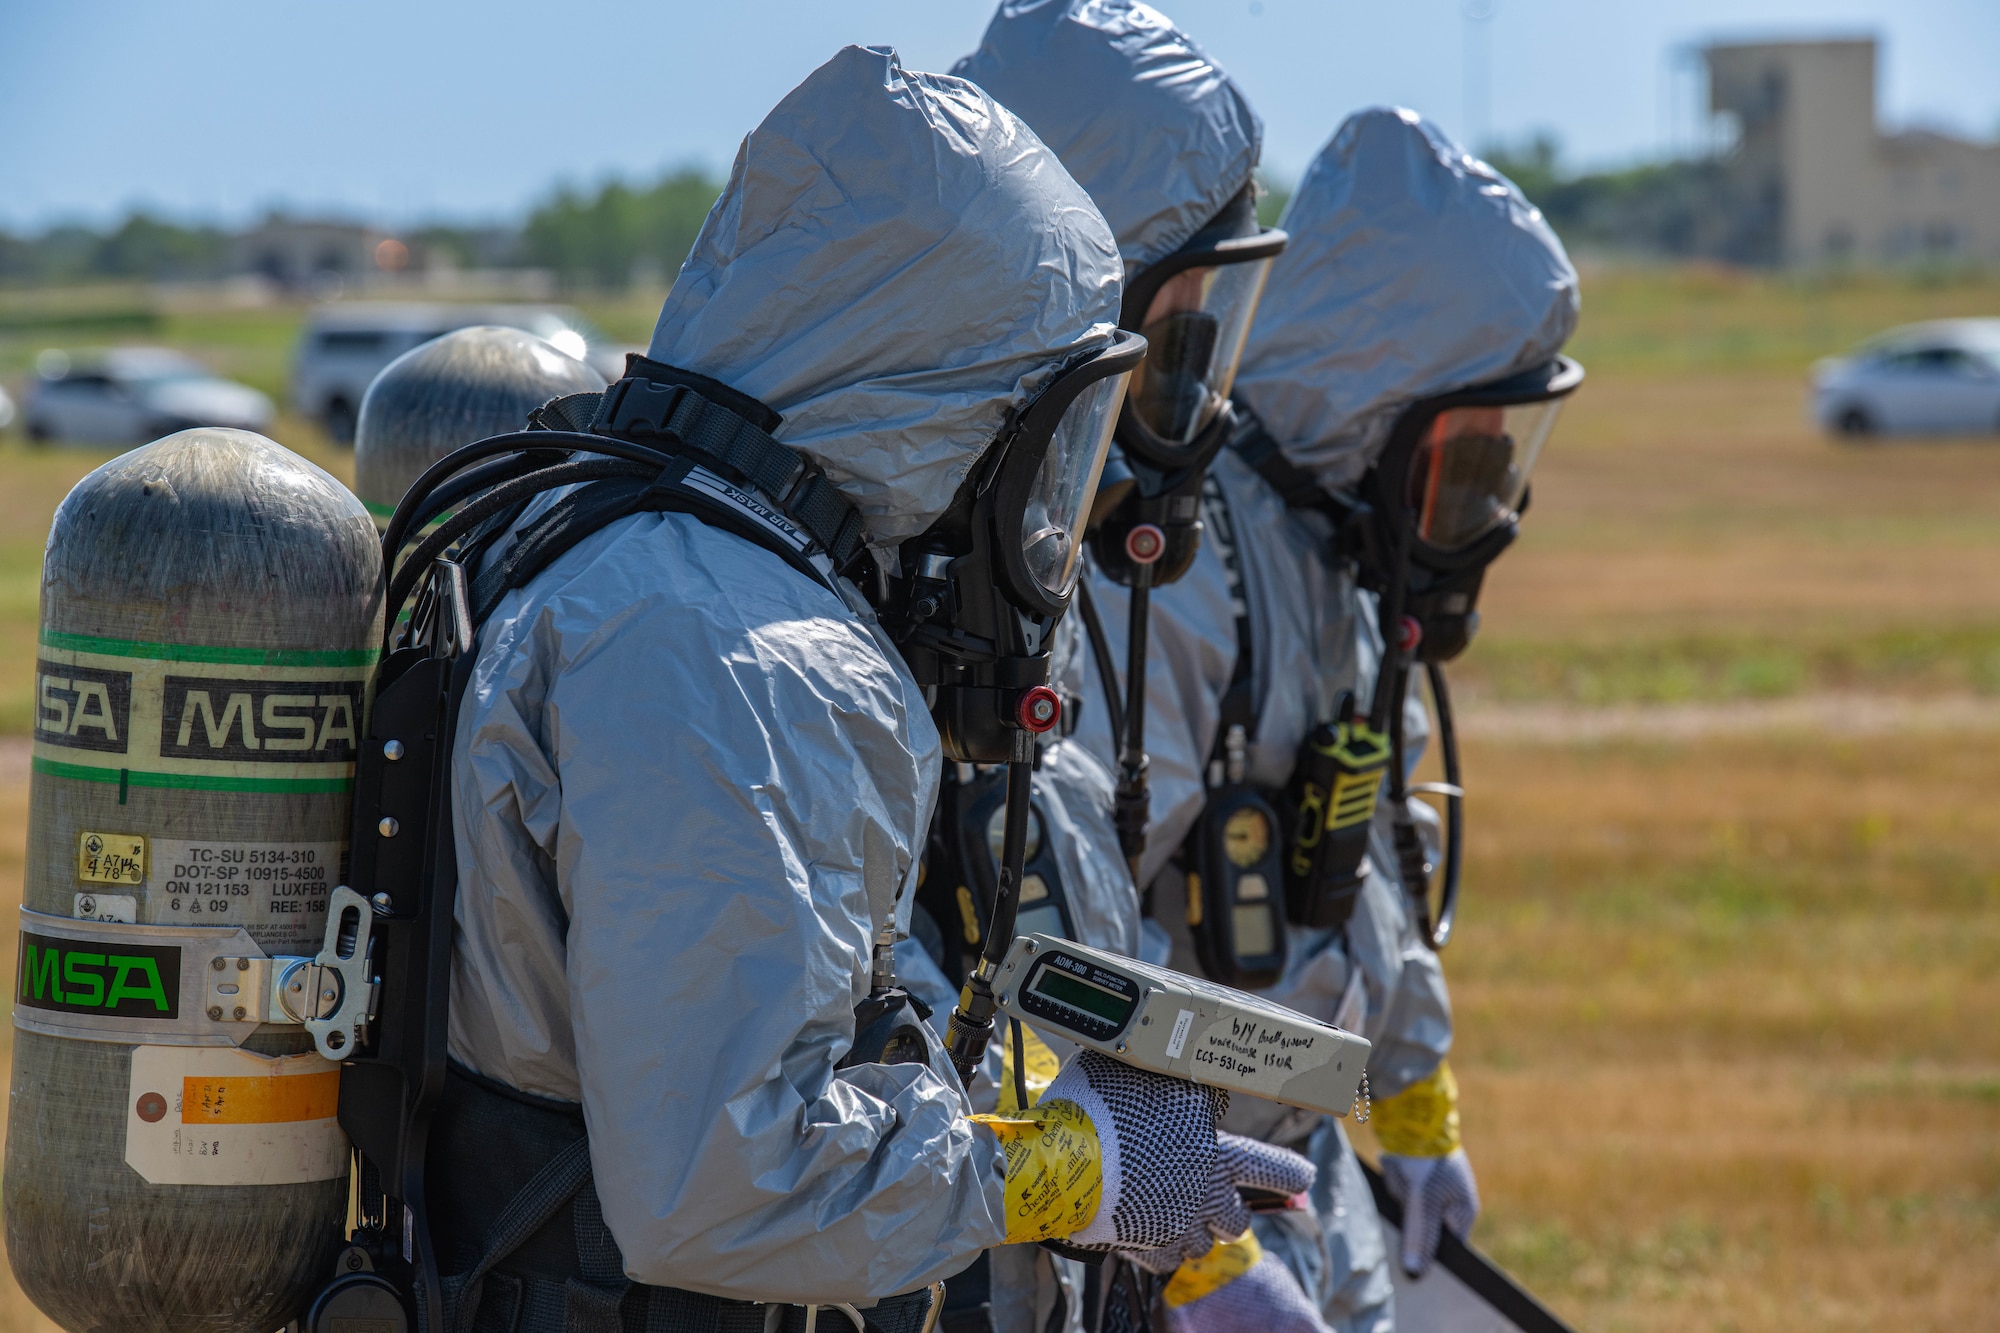 U.S. Airmen, assigned to the 5th Civil Engineer Squadron explosive ordnance disposal (EOD) flight, survey an area for ordnance during a readiness exercise at Minot Air Force Base, North Dakota, July 27, 2023. EOD utilizes specialized techniques to remove hazards created by explosive ordnance. (U.S. Air Force photo by Airman 1st Class Kyle Wilson)